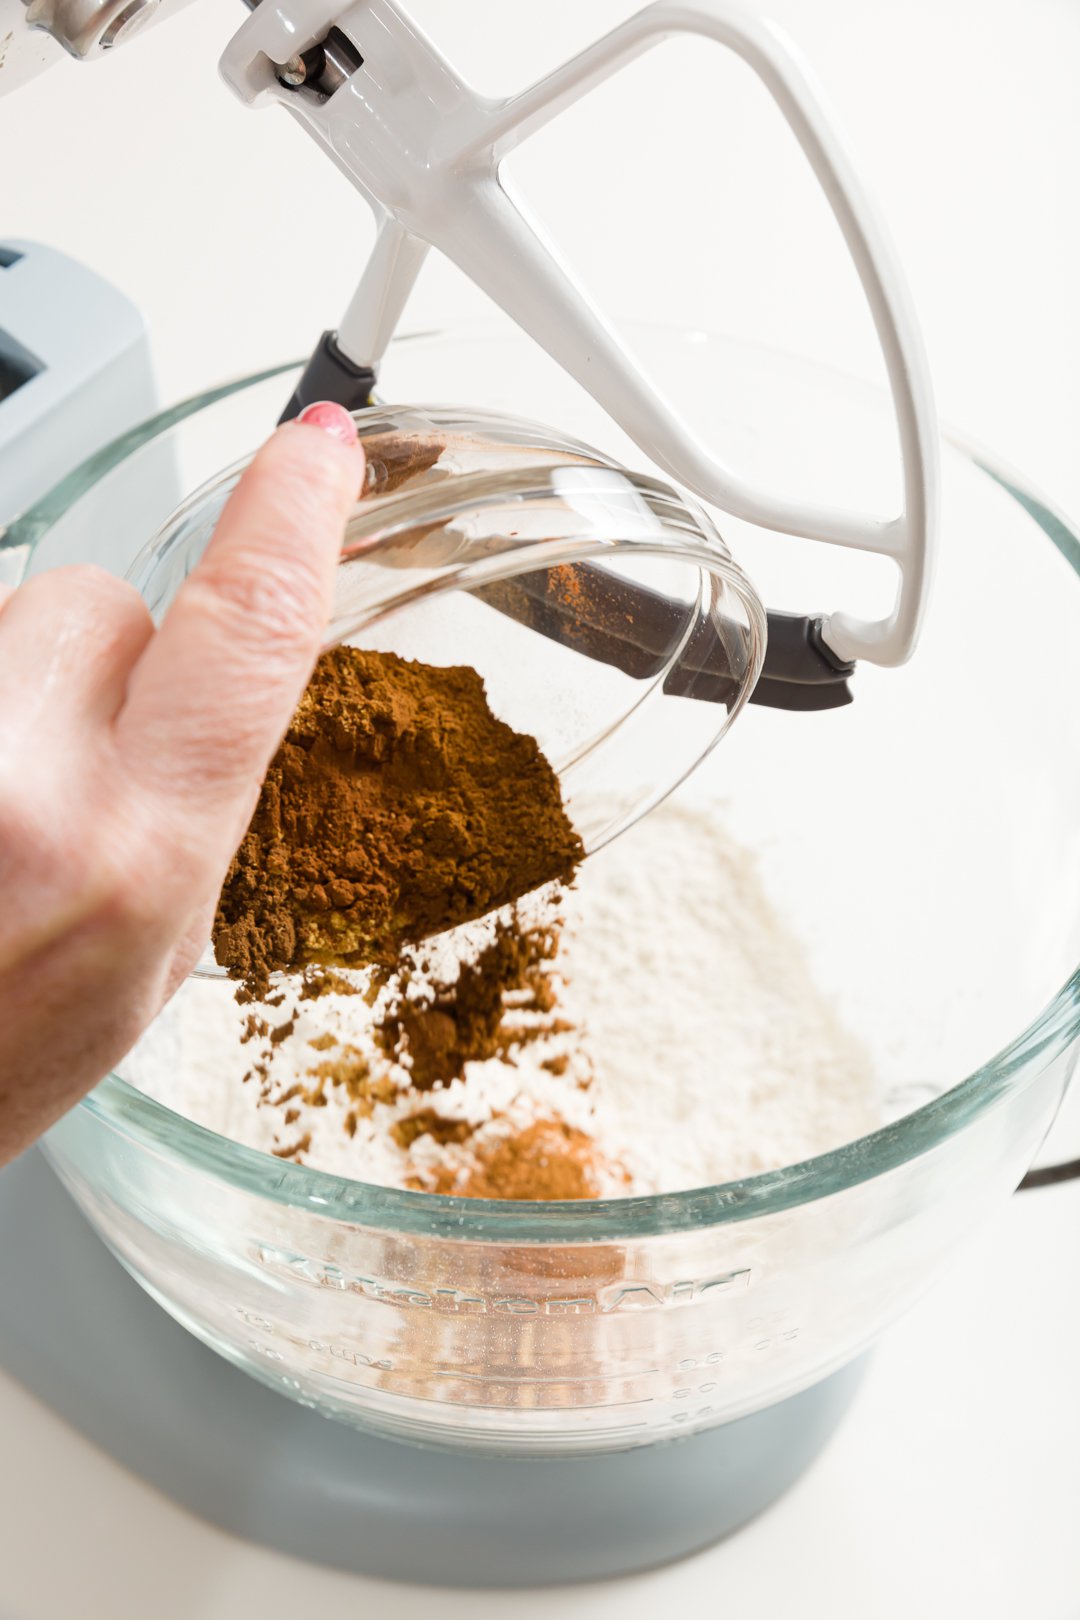 Adding spices to batter